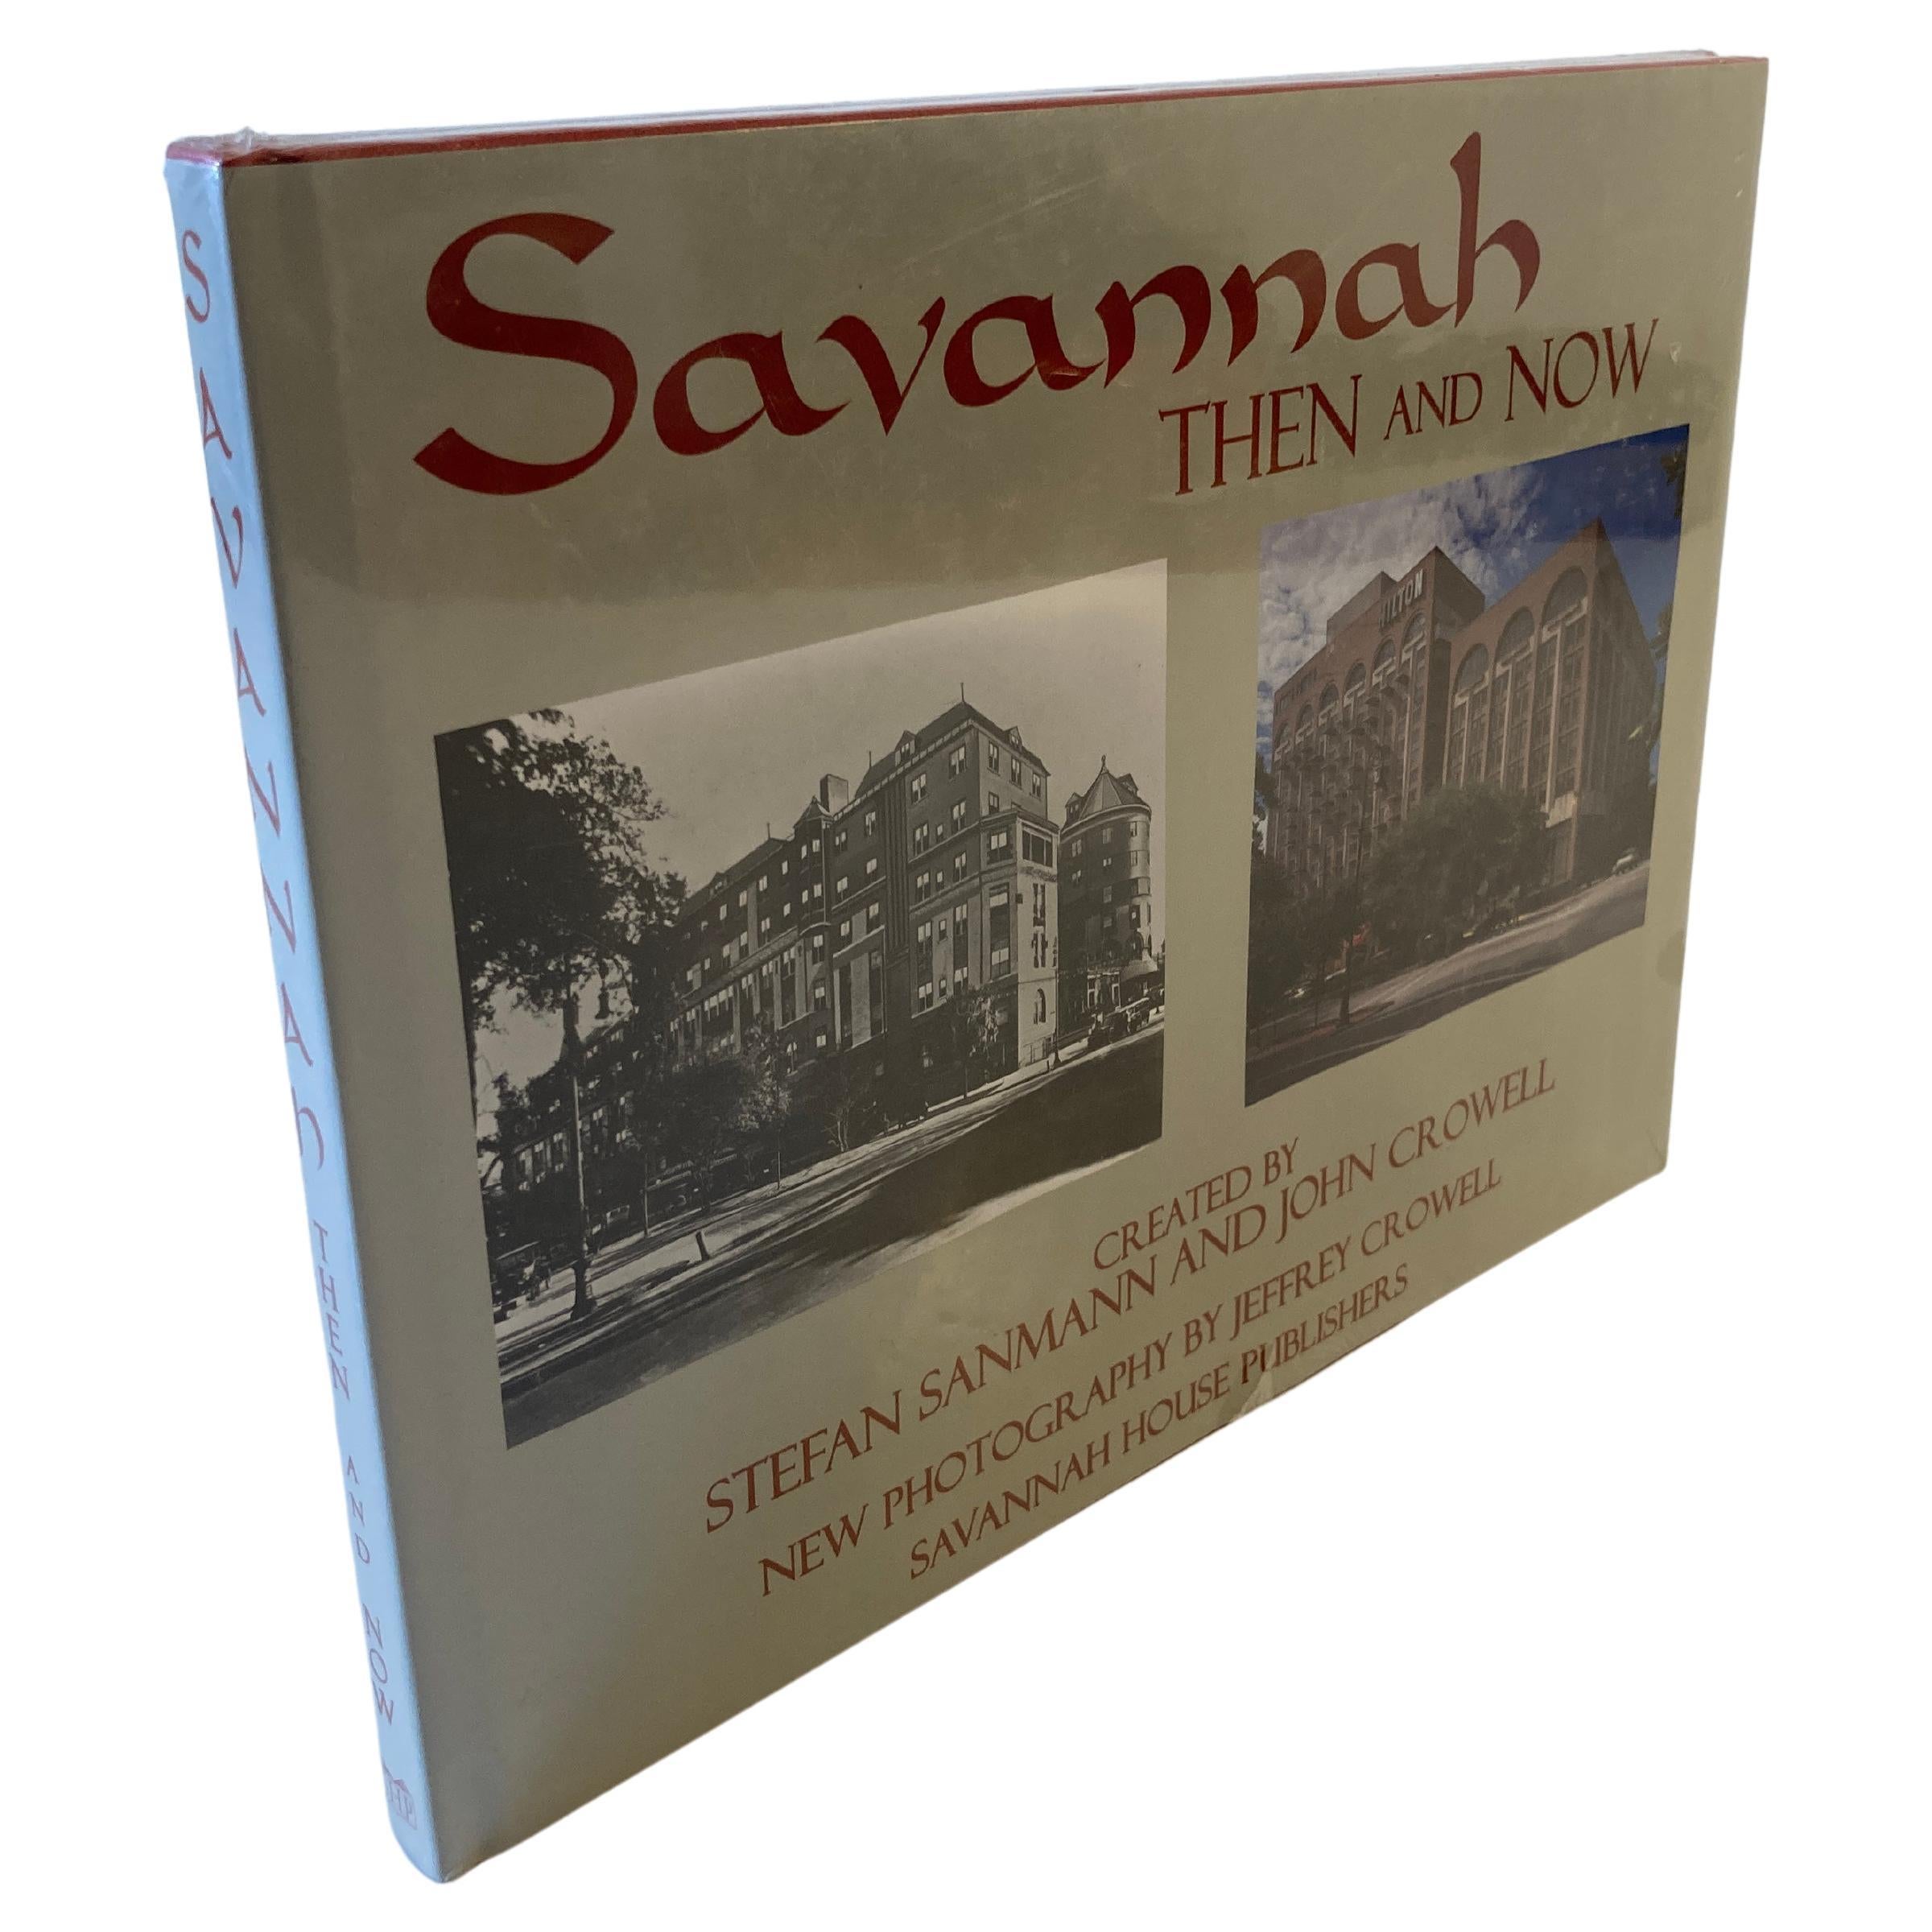 Savannah Then and Now by Stefan Sanmann and John Crowell Hardcover Book